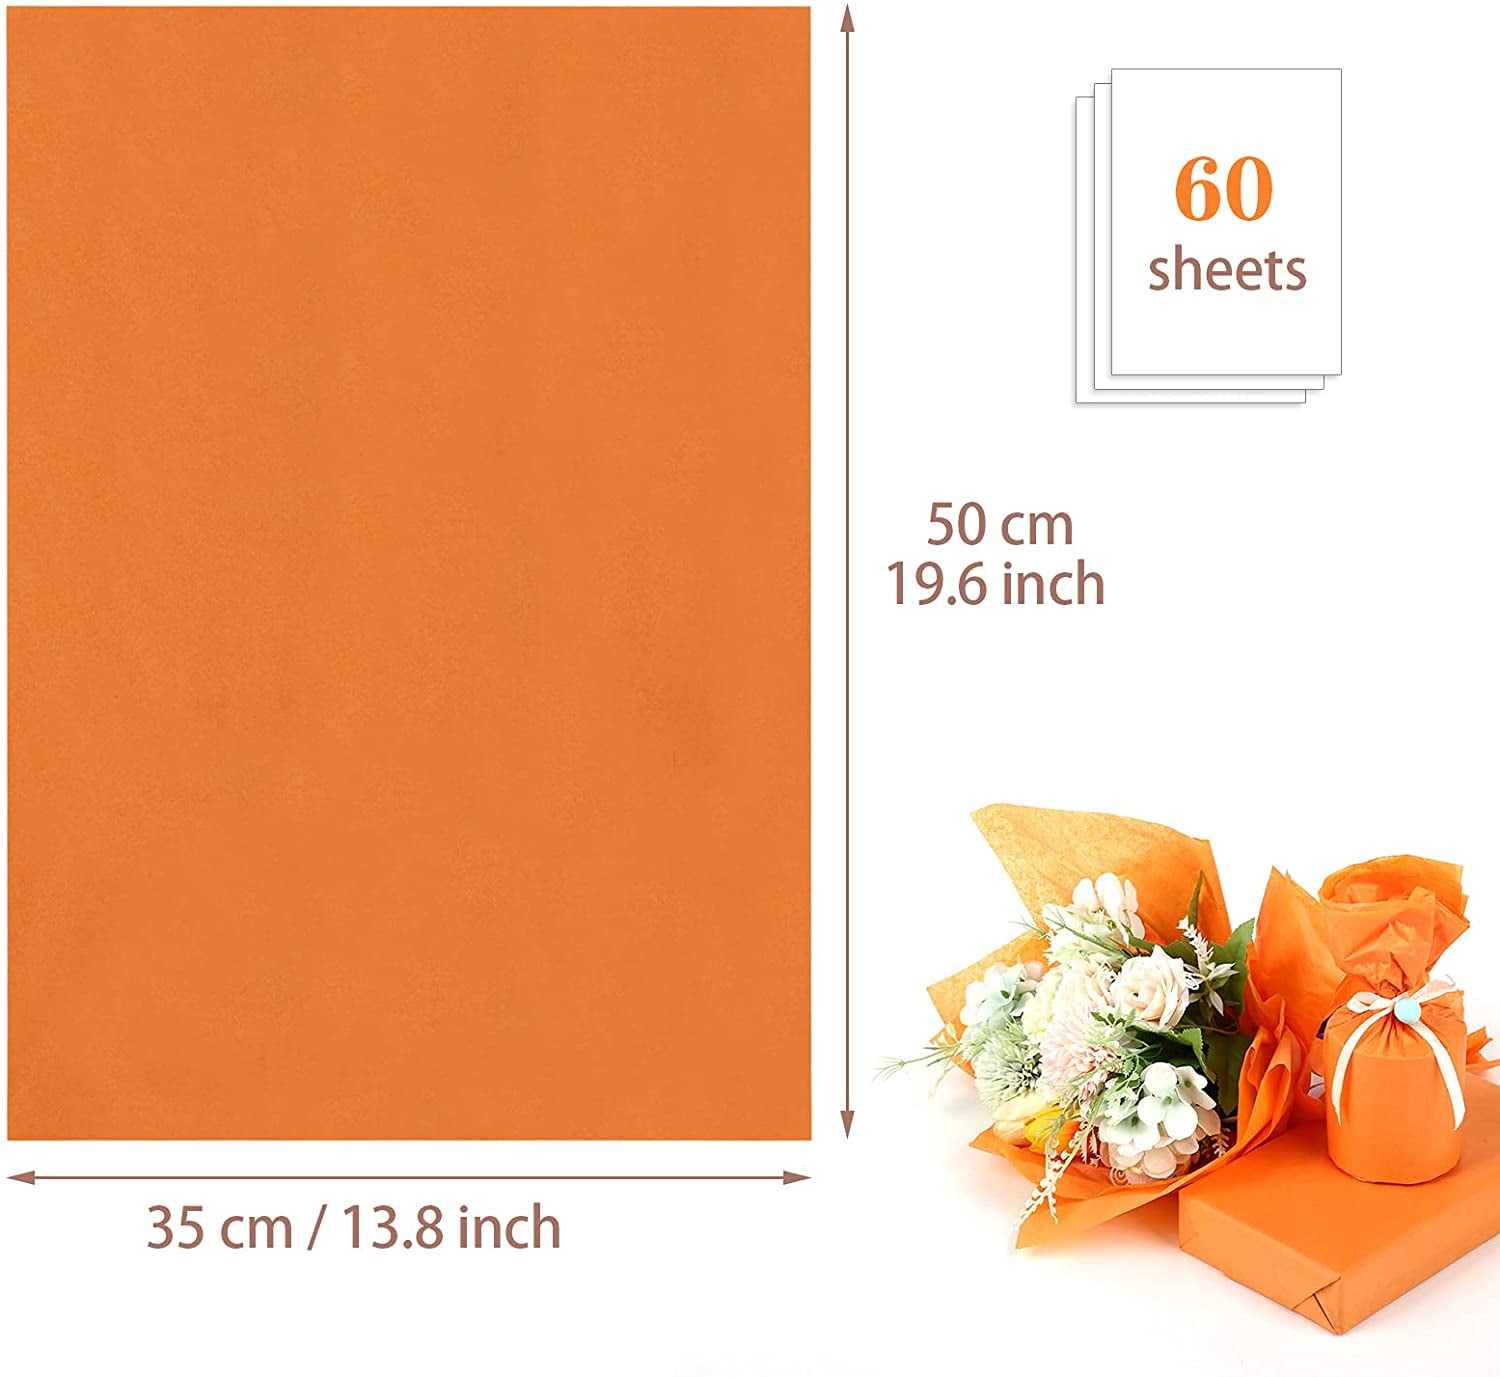 Naler 60 Sheets Orange Tissue Paper Bulk,14x 20 Crafts Wrapping Tissue  for Gift Bags DIY Packaging 